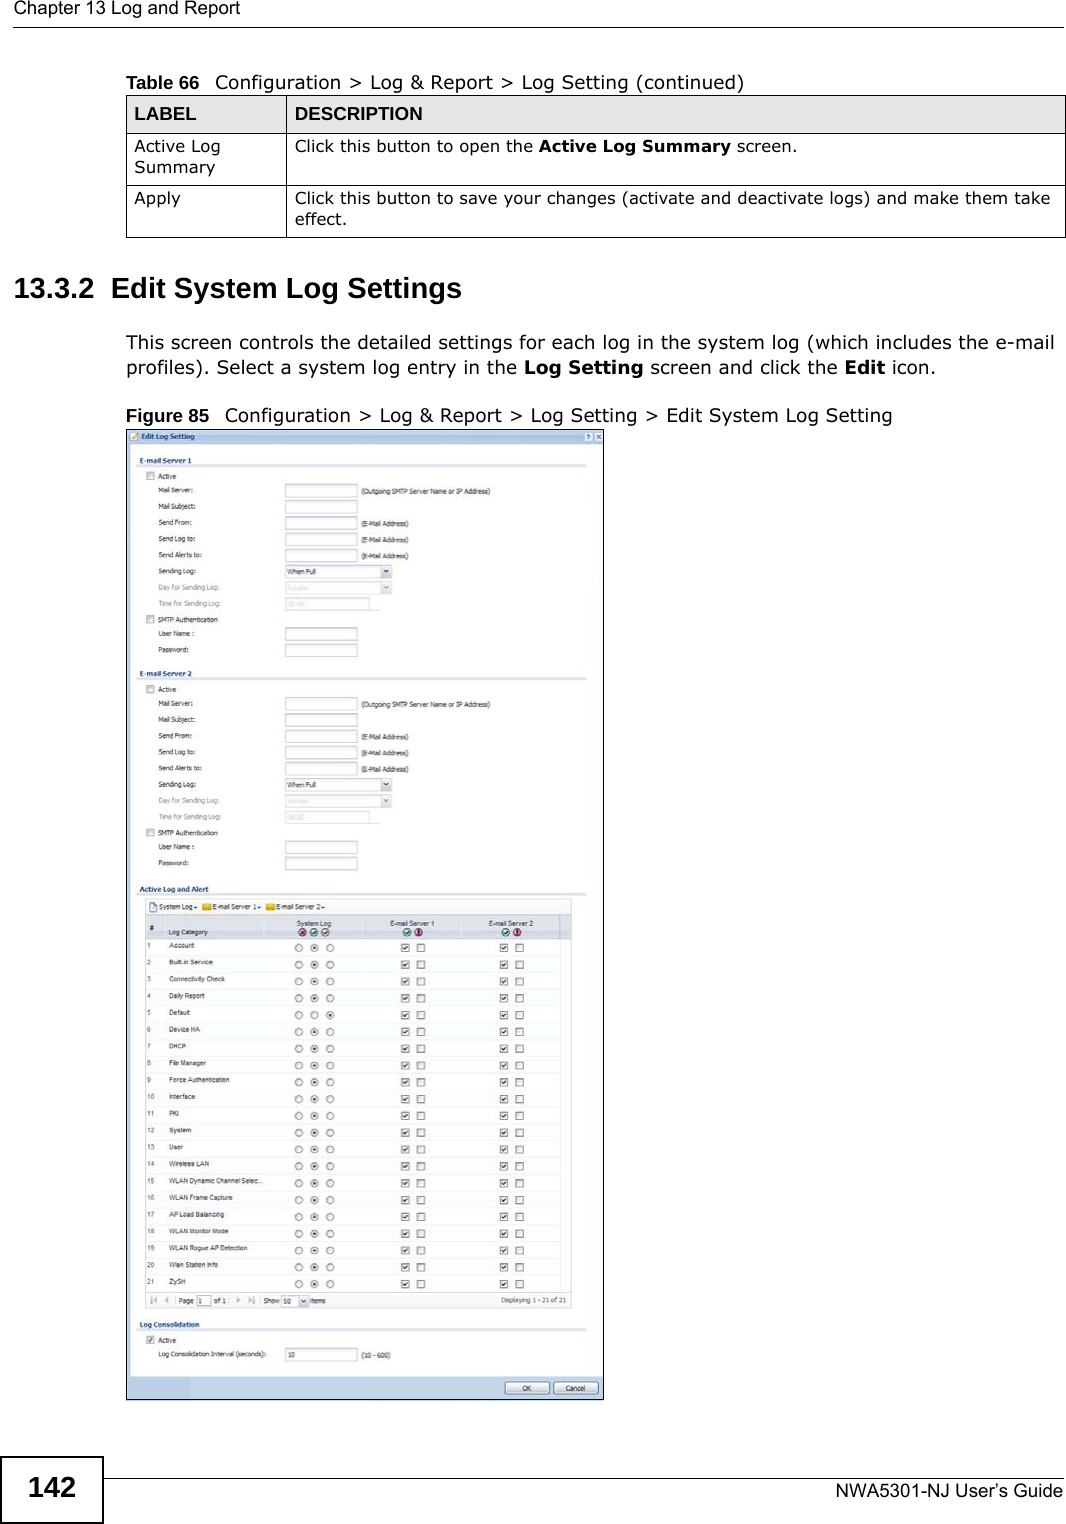 Chapter 13 Log and ReportNWA5301-NJ User’s Guide14213.3.2  Edit System Log Settings This screen controls the detailed settings for each log in the system log (which includes the e-mail profiles). Select a system log entry in the Log Setting screen and click the Edit icon.Figure 85   Configuration &gt; Log &amp; Report &gt; Log Setting &gt; Edit System Log Setting  Active Log SummaryClick this button to open the Active Log Summary screen.Apply Click this button to save your changes (activate and deactivate logs) and make them take effect.Table 66   Configuration &gt; Log &amp; Report &gt; Log Setting (continued)LABEL DESCRIPTION